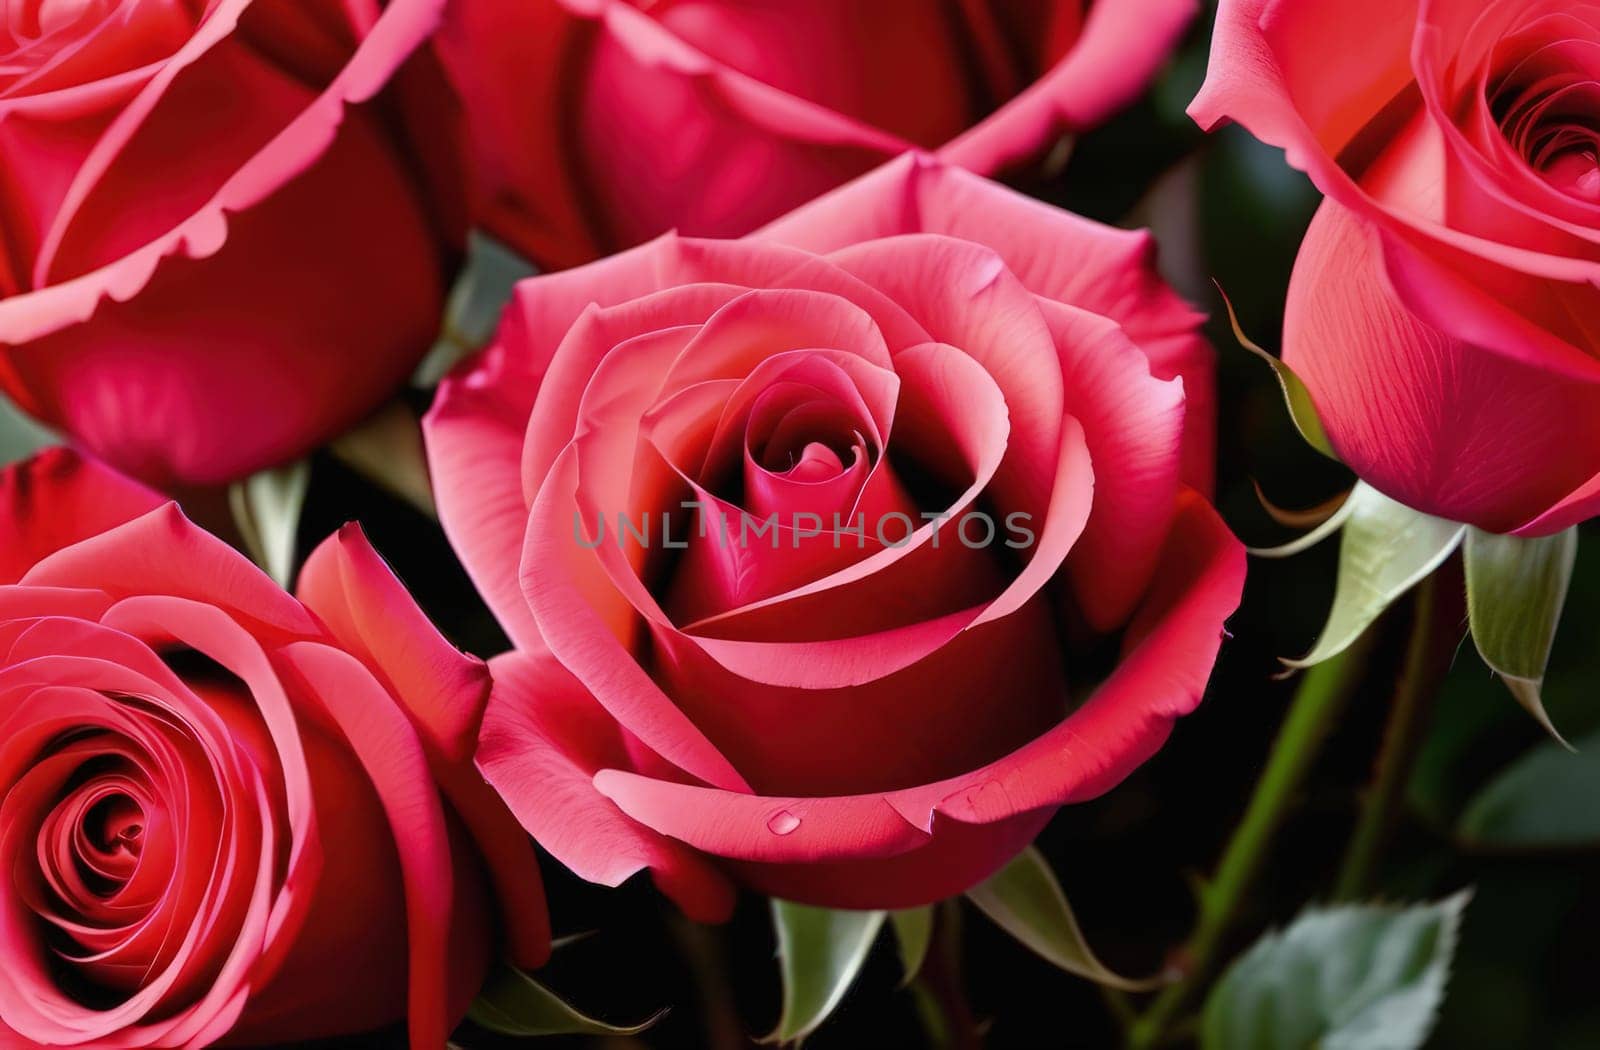 Beautiful banner with red roses background of Mothers, Valentine Day, Birthday, Anniversary, Wedding. Copy space. For advertisement, greeting card mockup, presentation, header, poster, website print